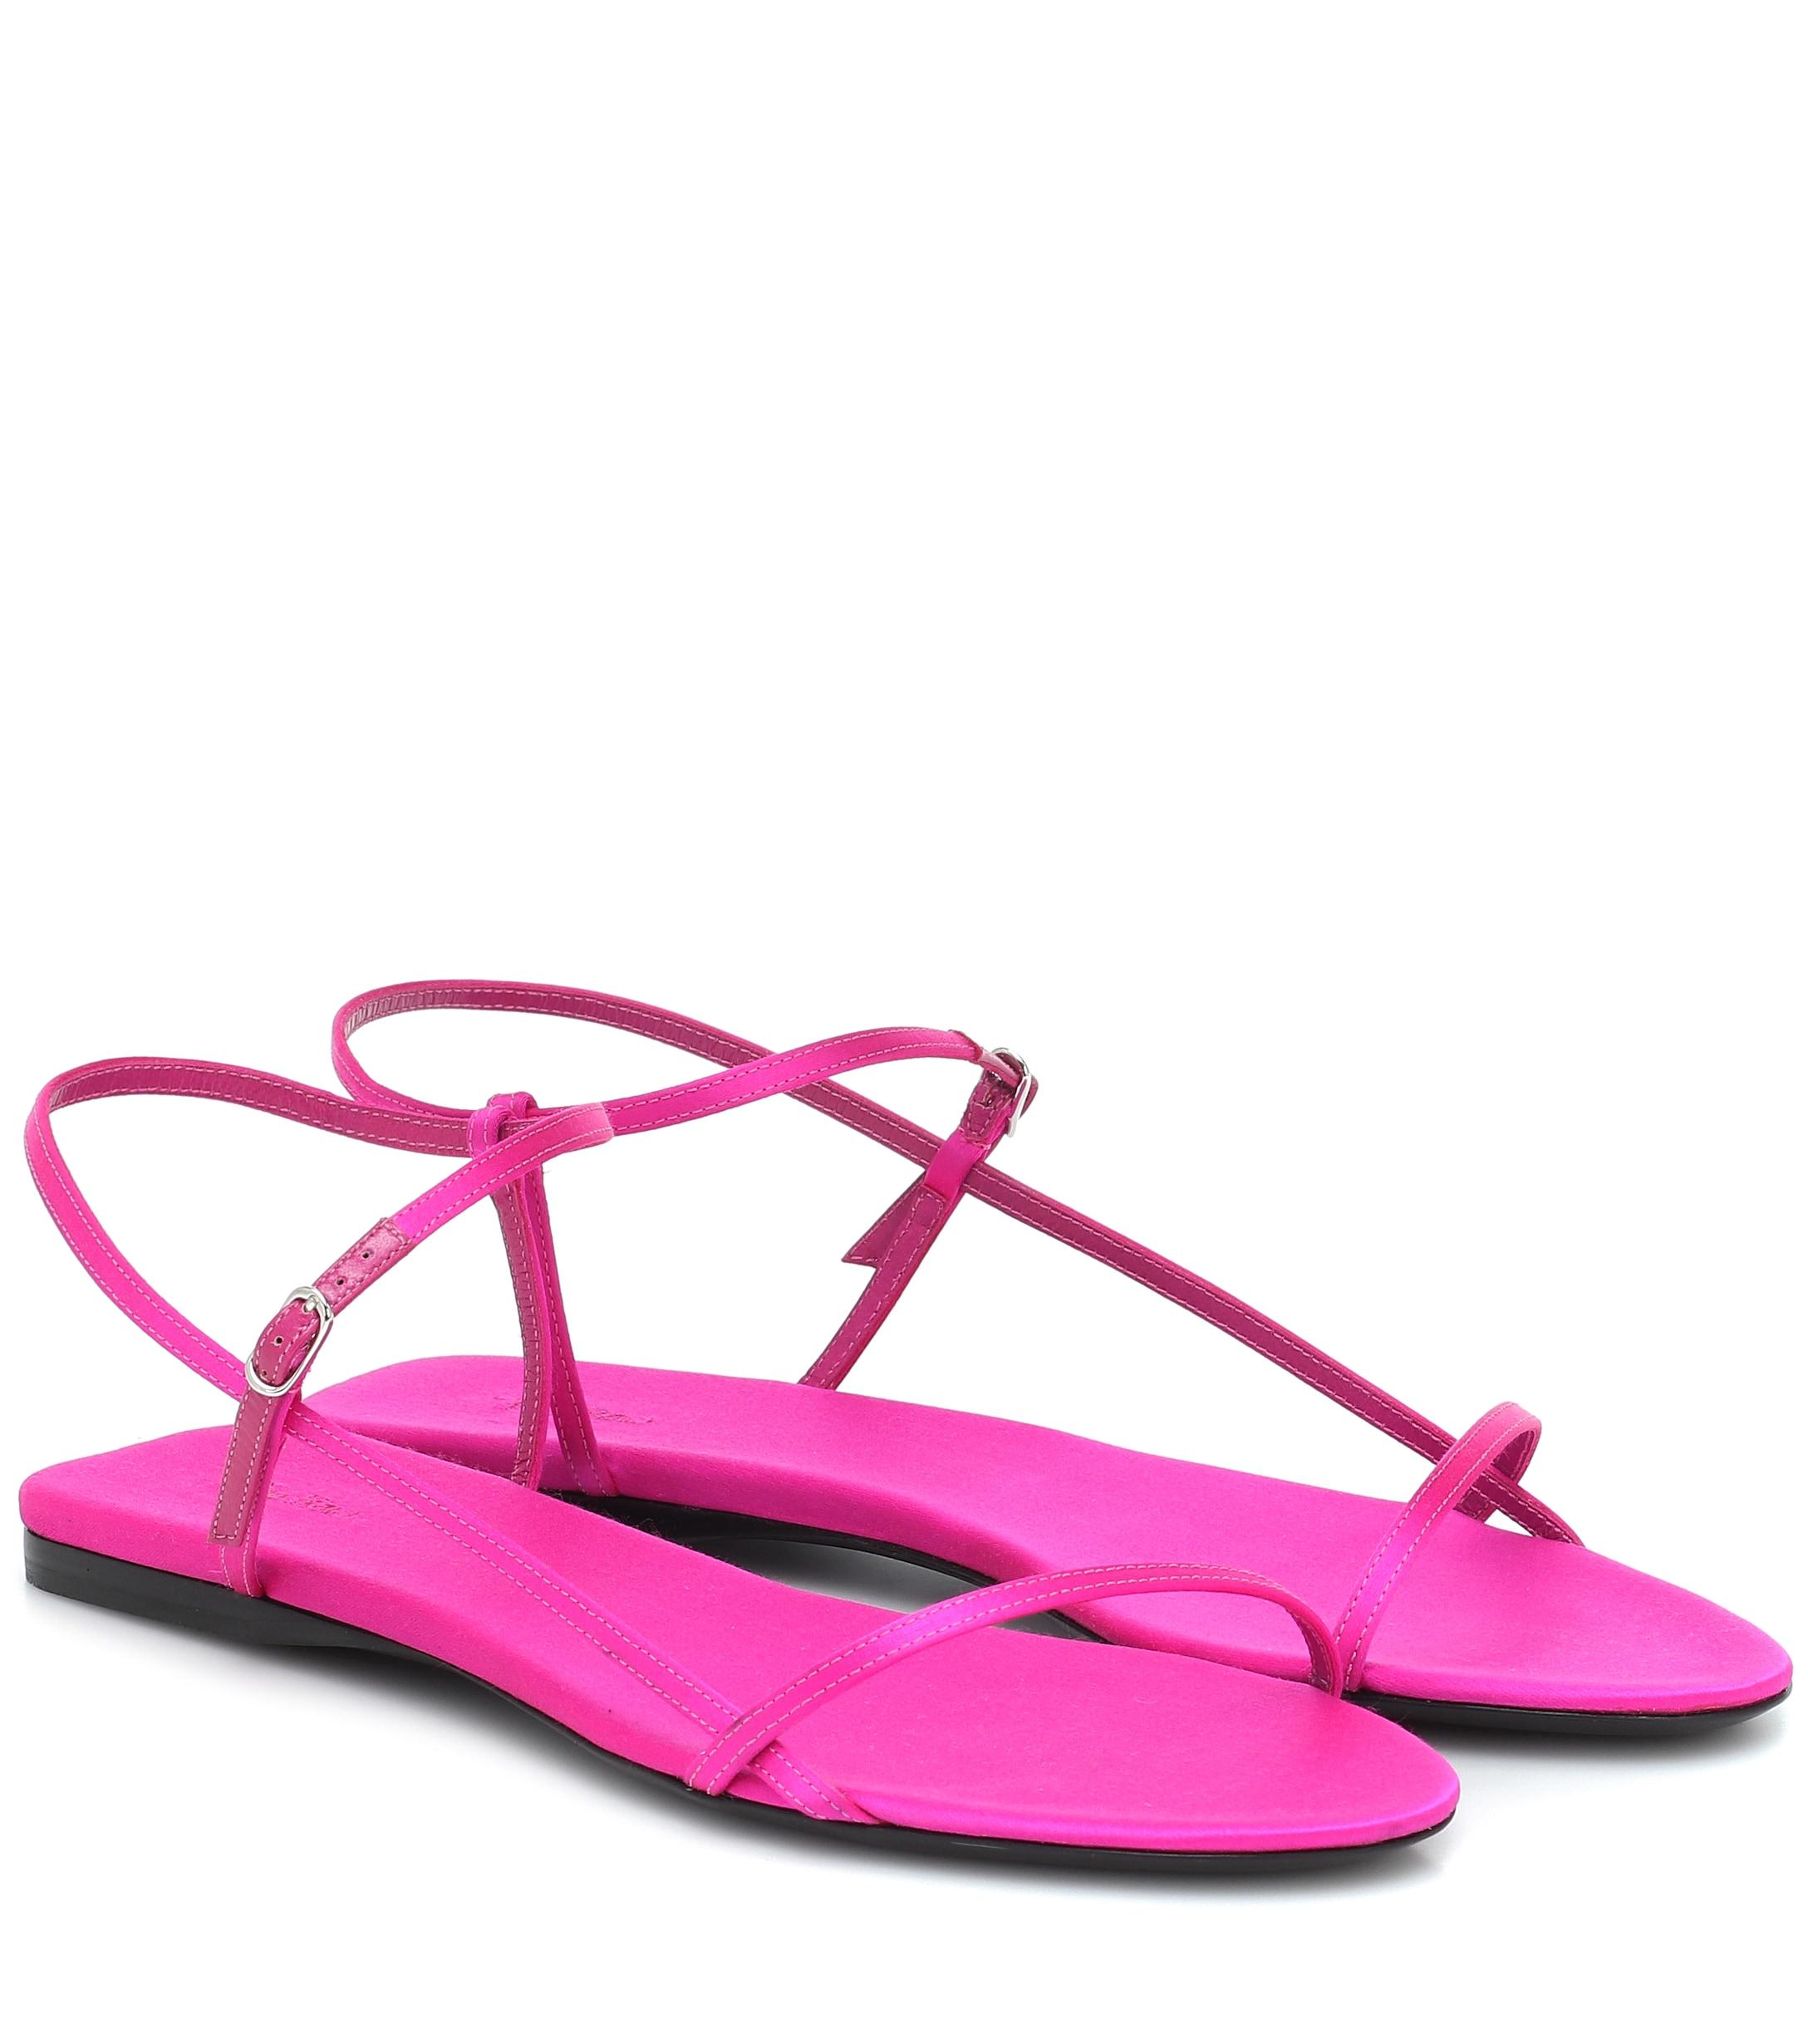 The Row Bare Satin Sandals in Pink - Lyst